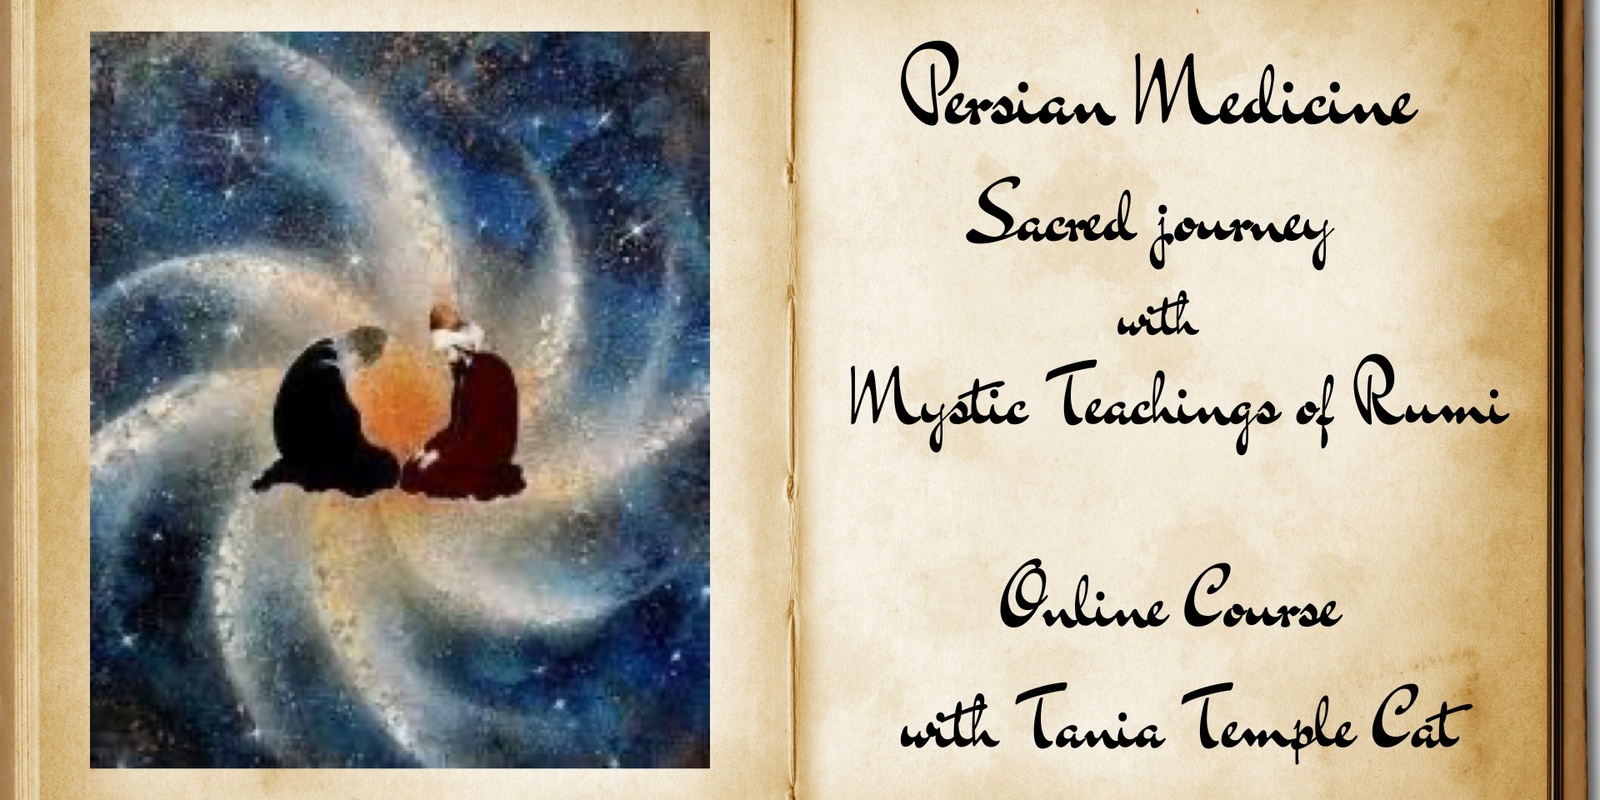 Banner image for Persian Medicine: Sacred journey with Mystic Teachings of Rumi Online Course with Tania Temple Cat